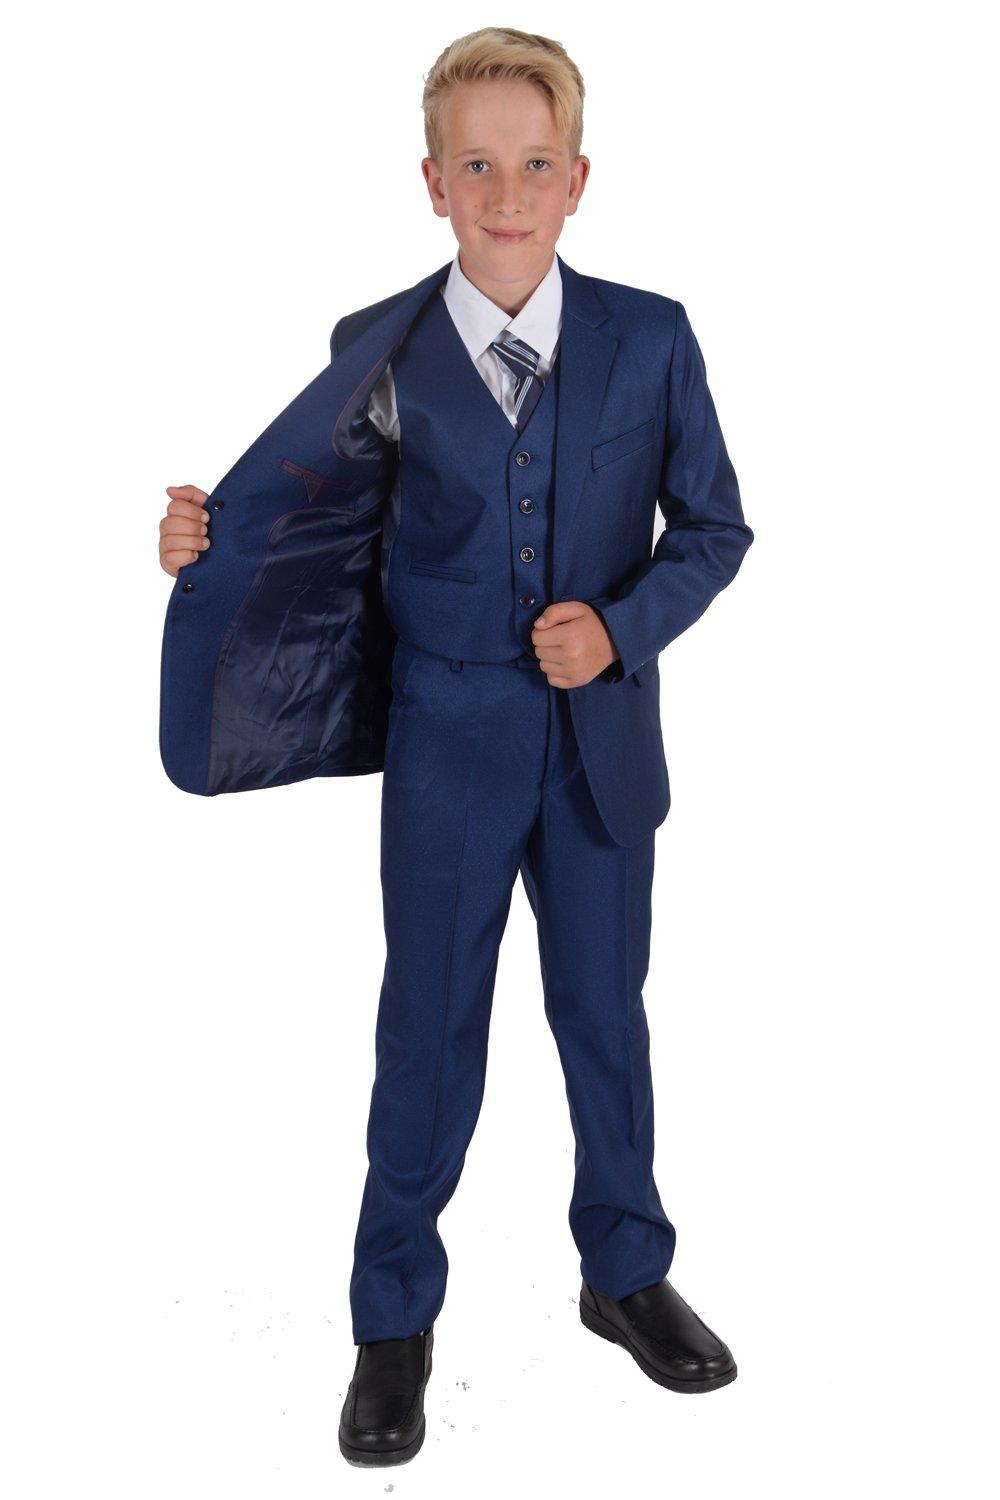 5 Piece Suits Wedding Page Boy Party Prom